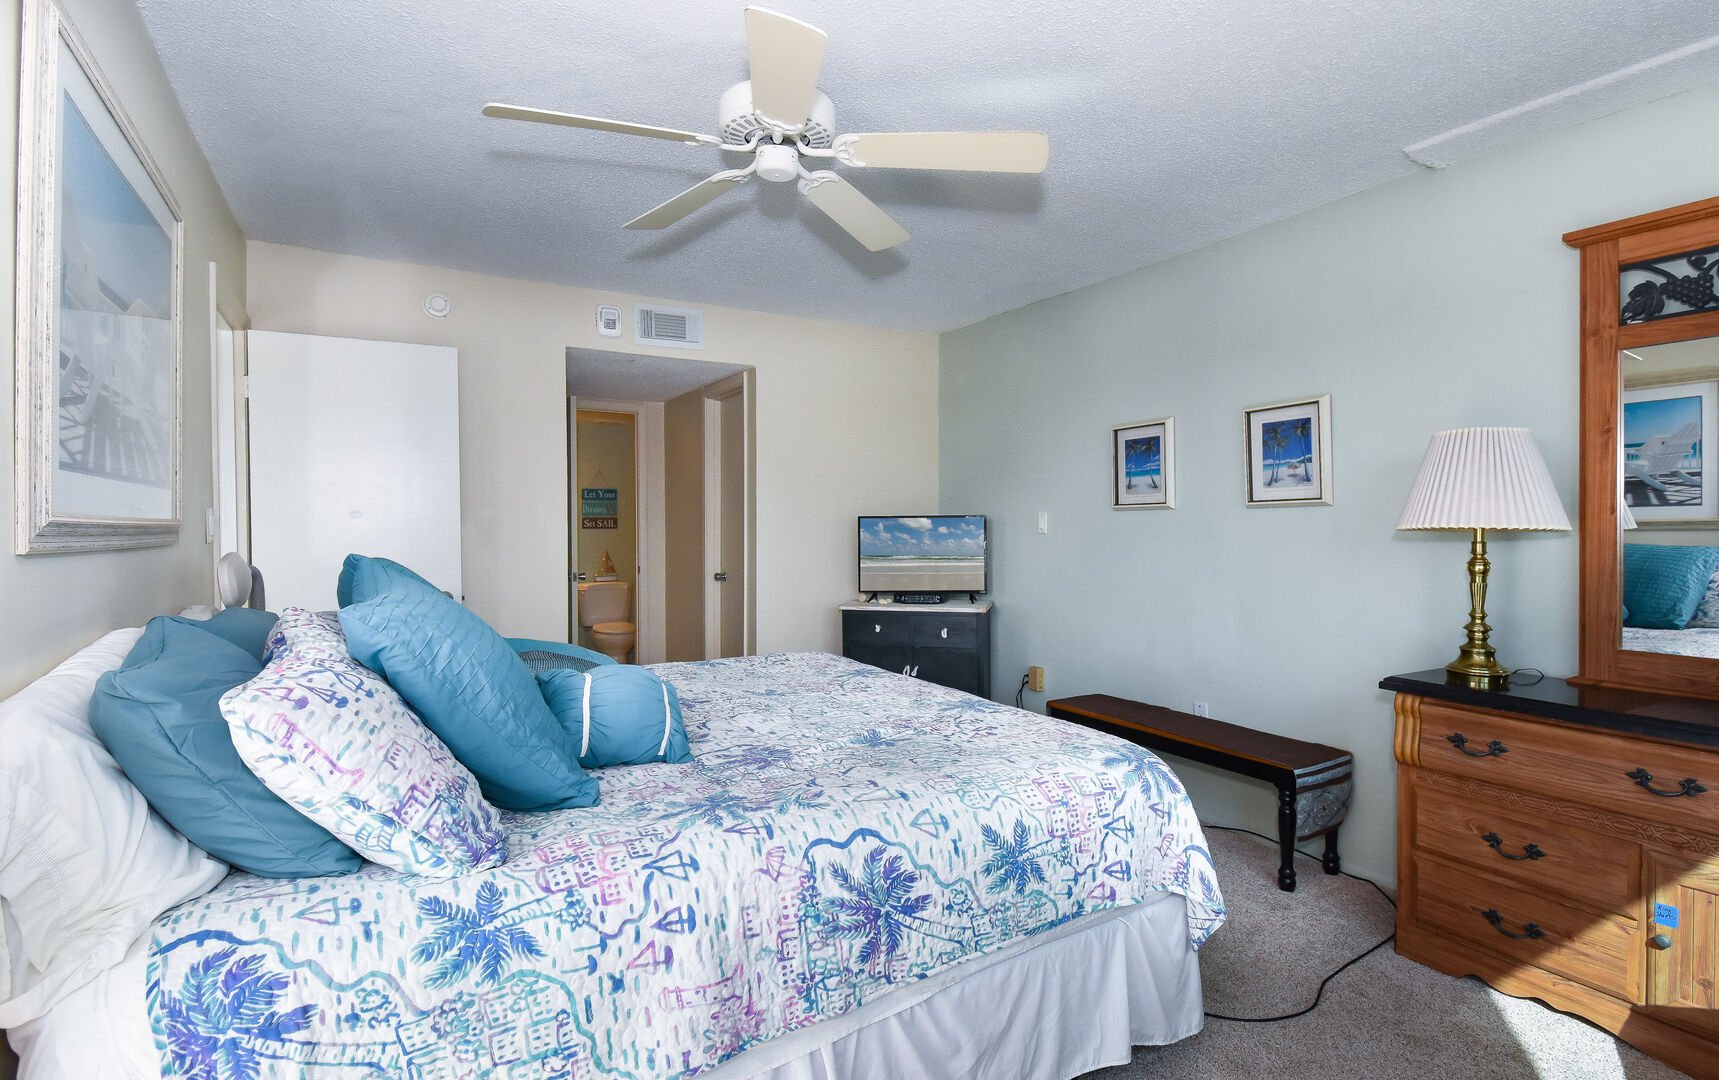 Bedroom of this private condo in New Smyrna Beach with a large bed across from a vanity dresser.